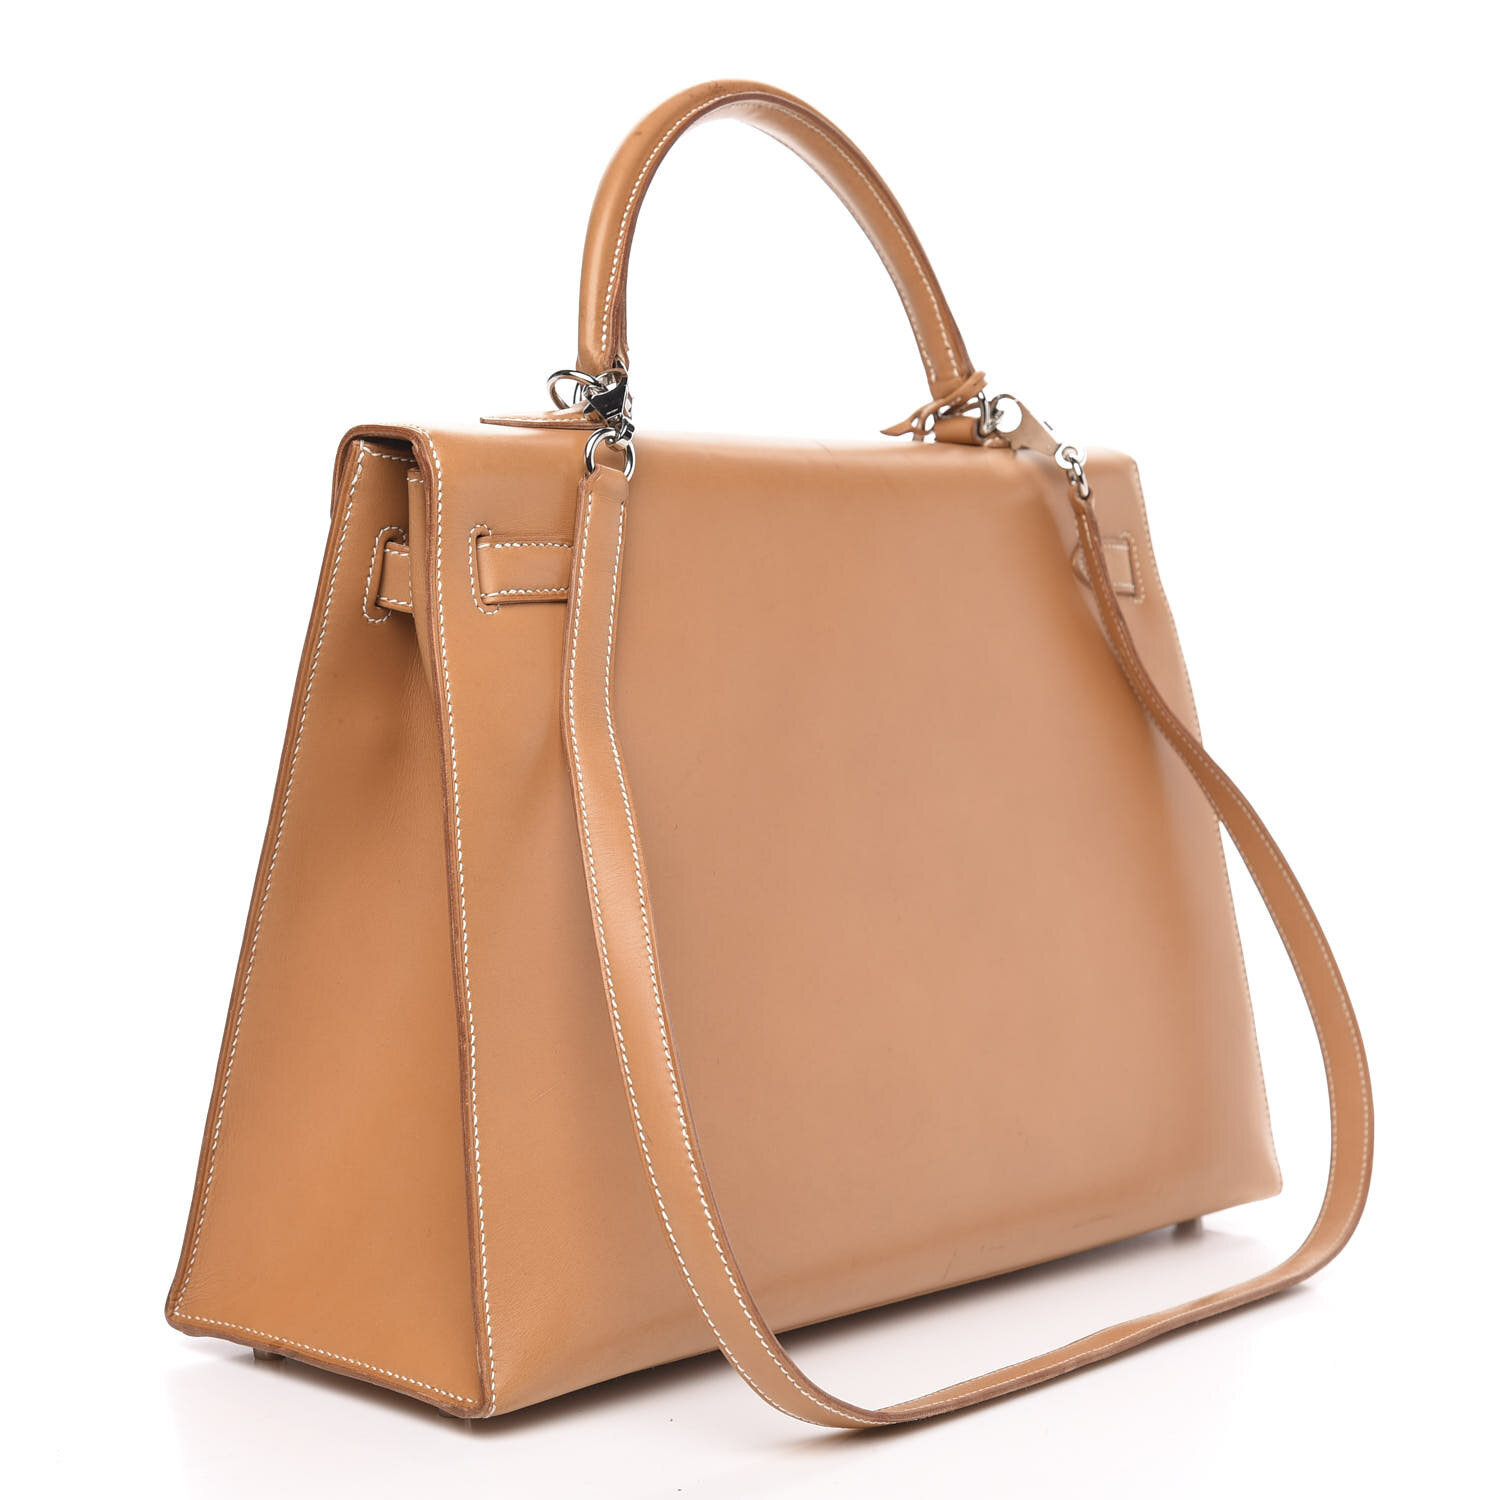 hermes-vache-natural-kelly-sellier-35-available-for-sale-CollectingLuxury-3.jpg